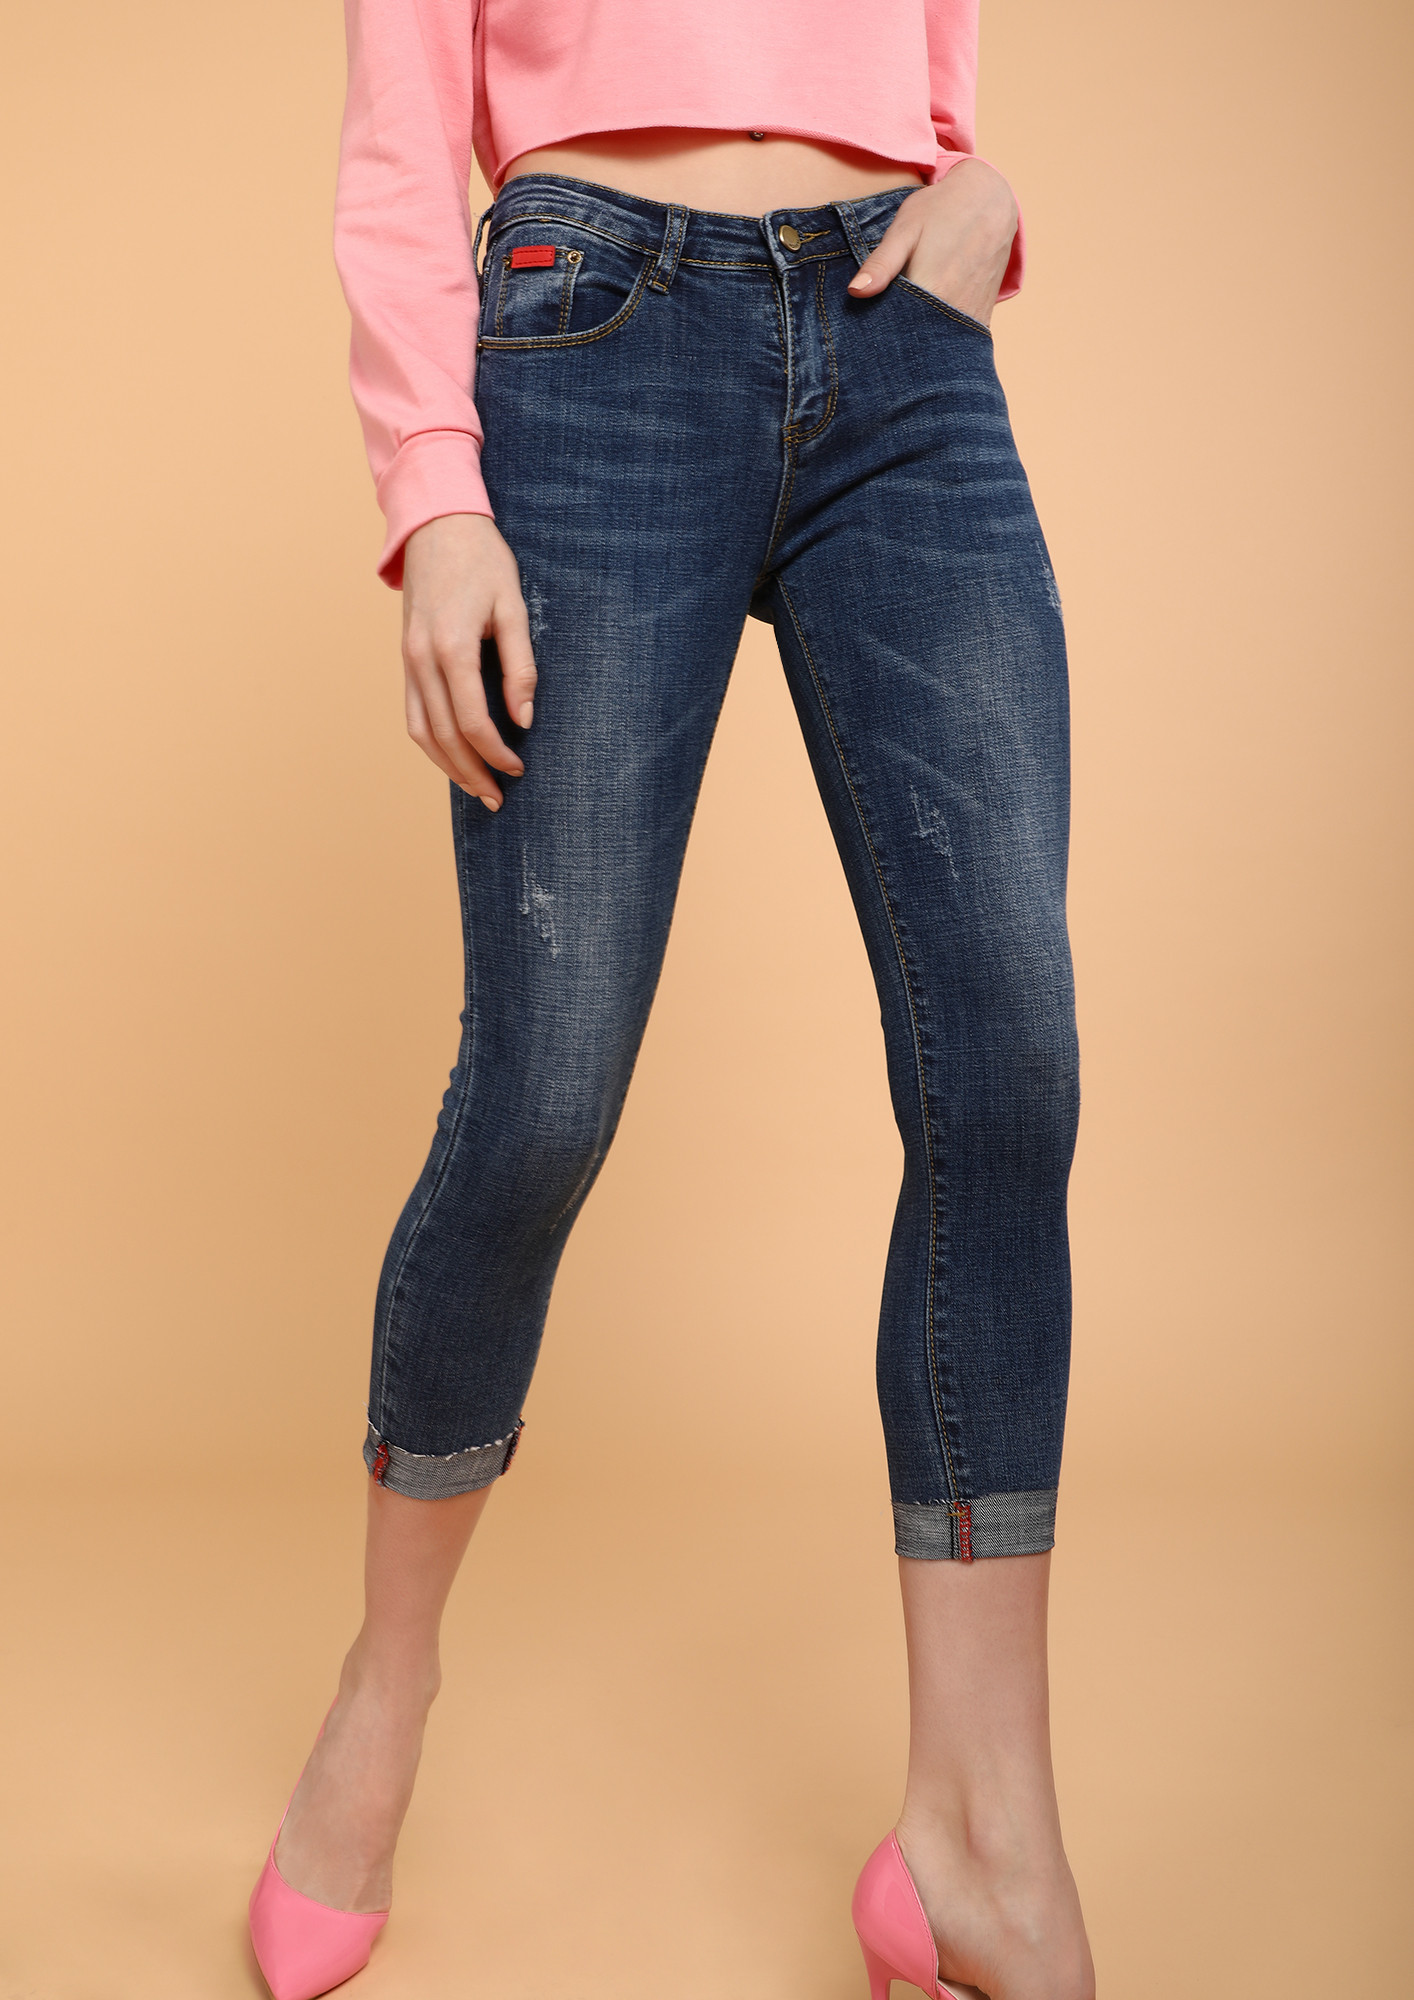 CHOP YOUR OWN WOOD BLUE CROPPED JEANS